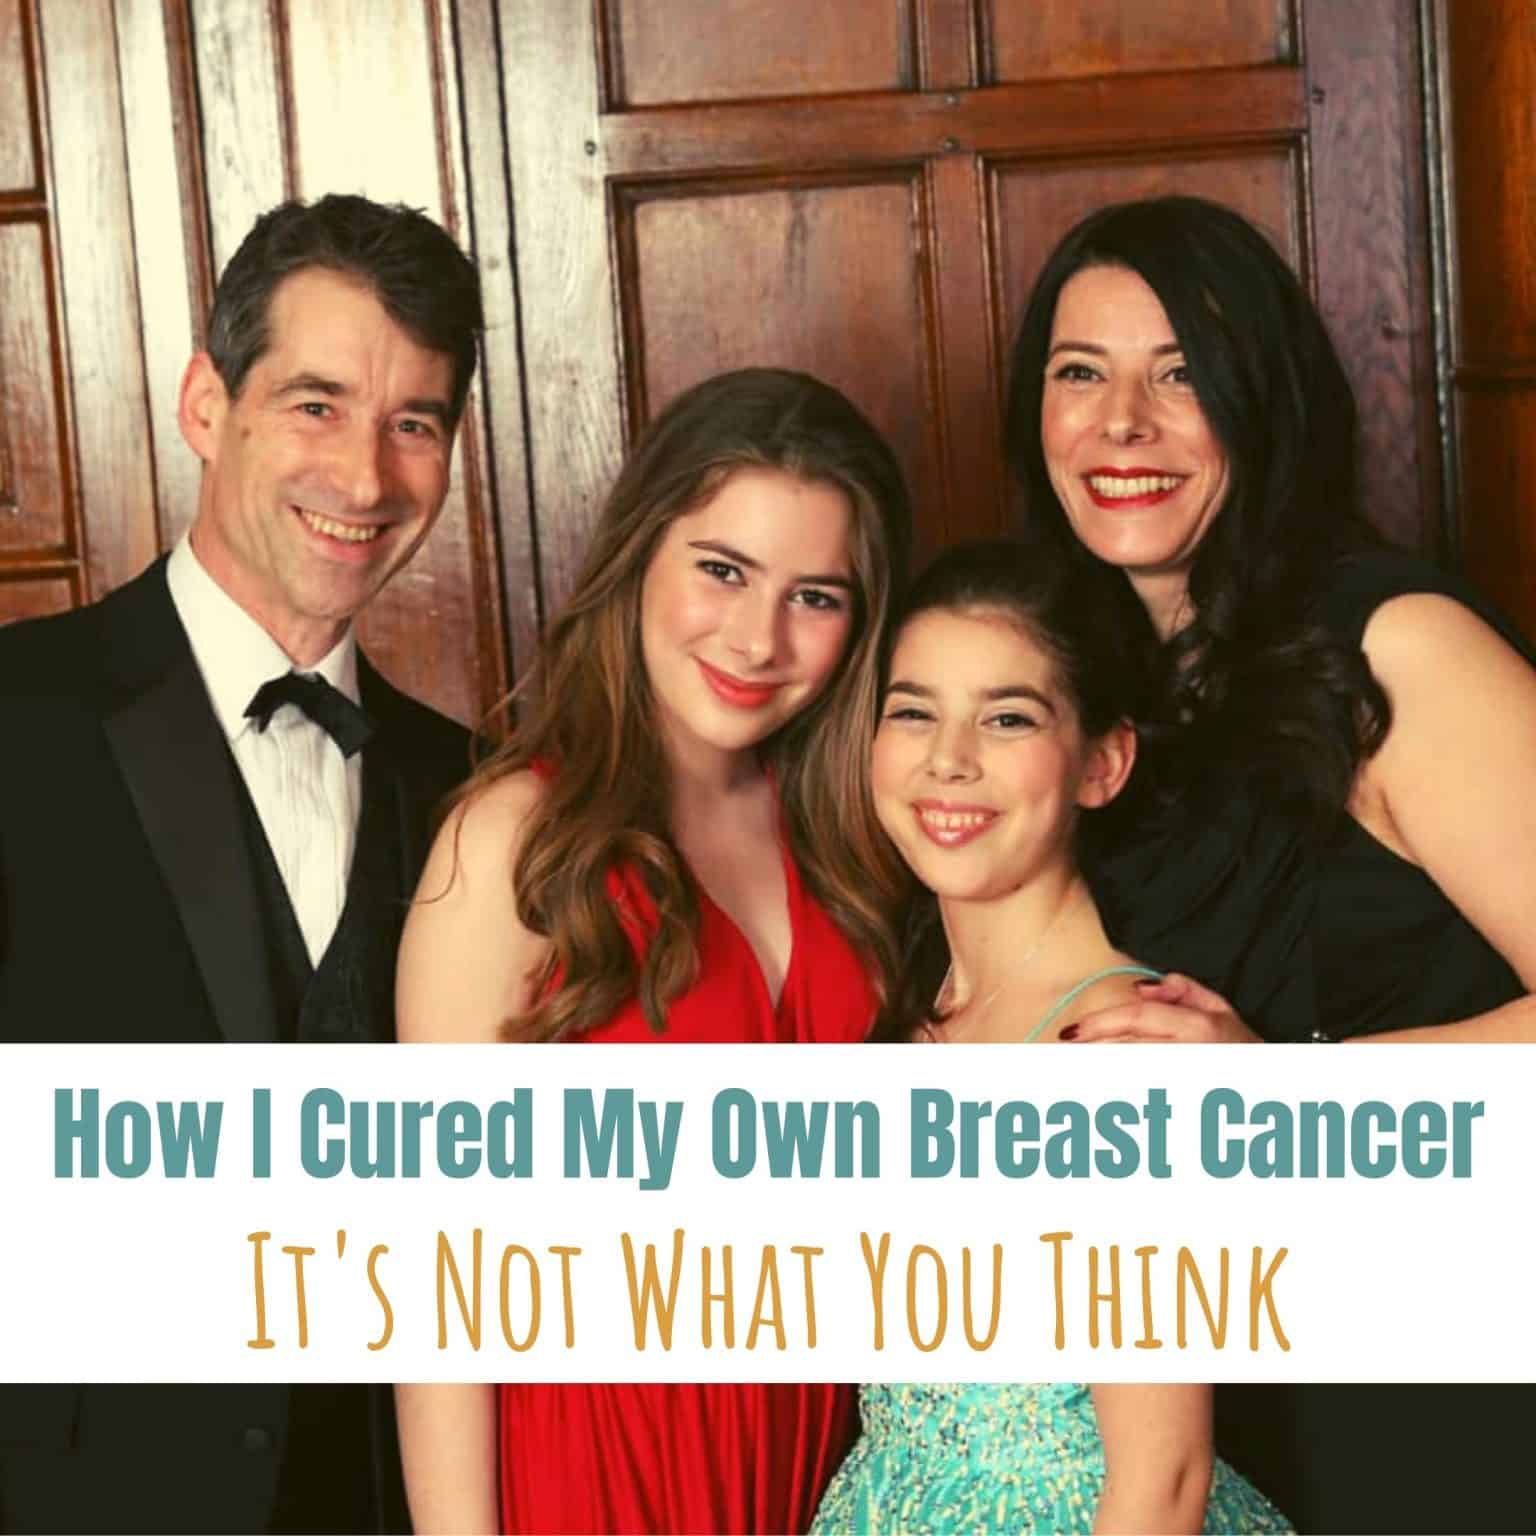 How I Cured My Own Breast Cancer With One Simple Trick